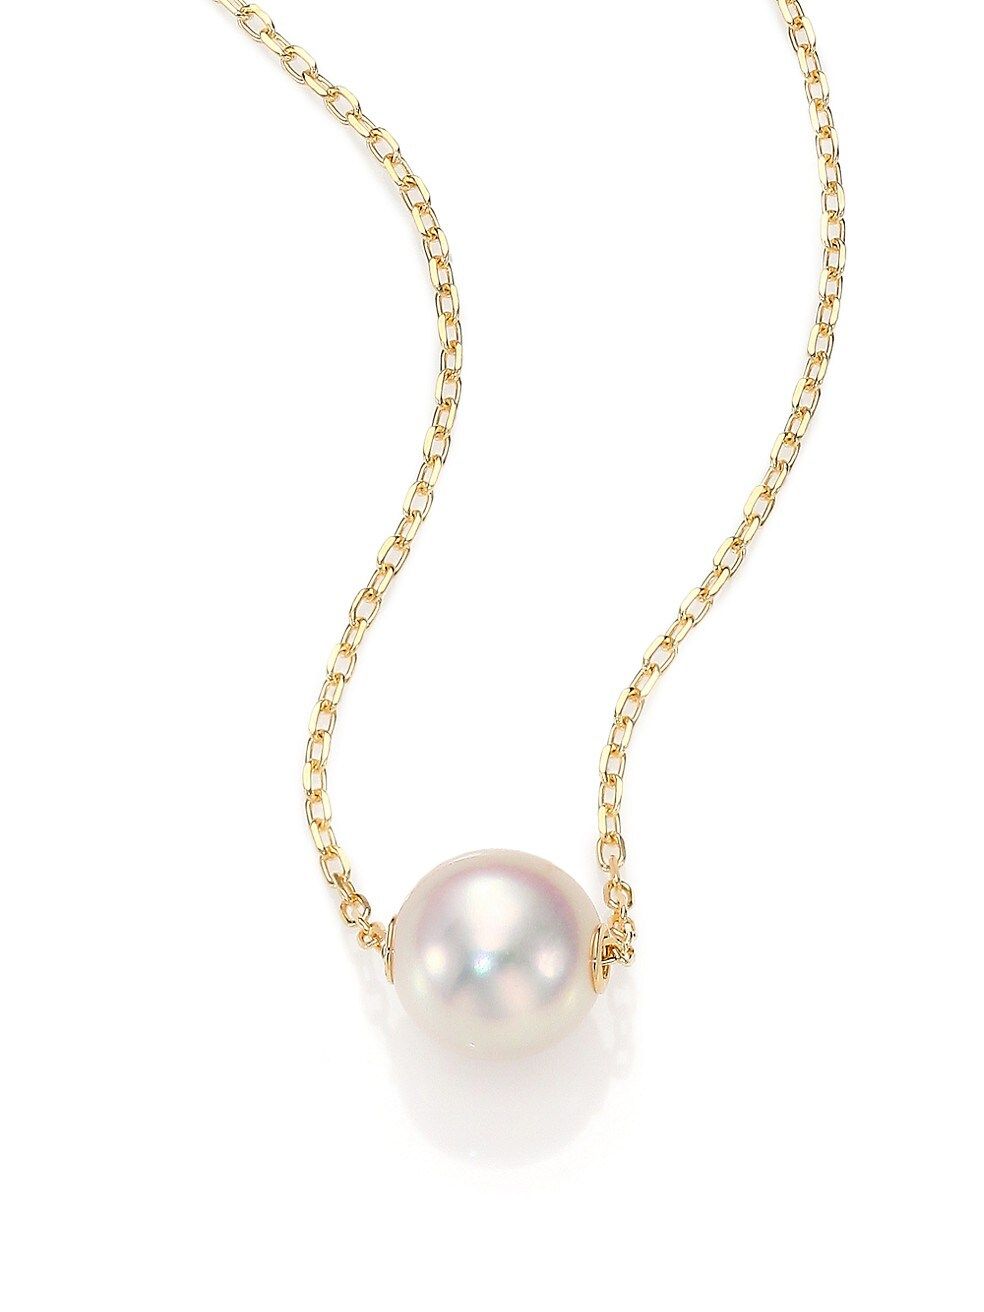 8MM White Cultured Akoya Pearl & 18K Yellow Gold Pendant Necklace | Saks Fifth Avenue